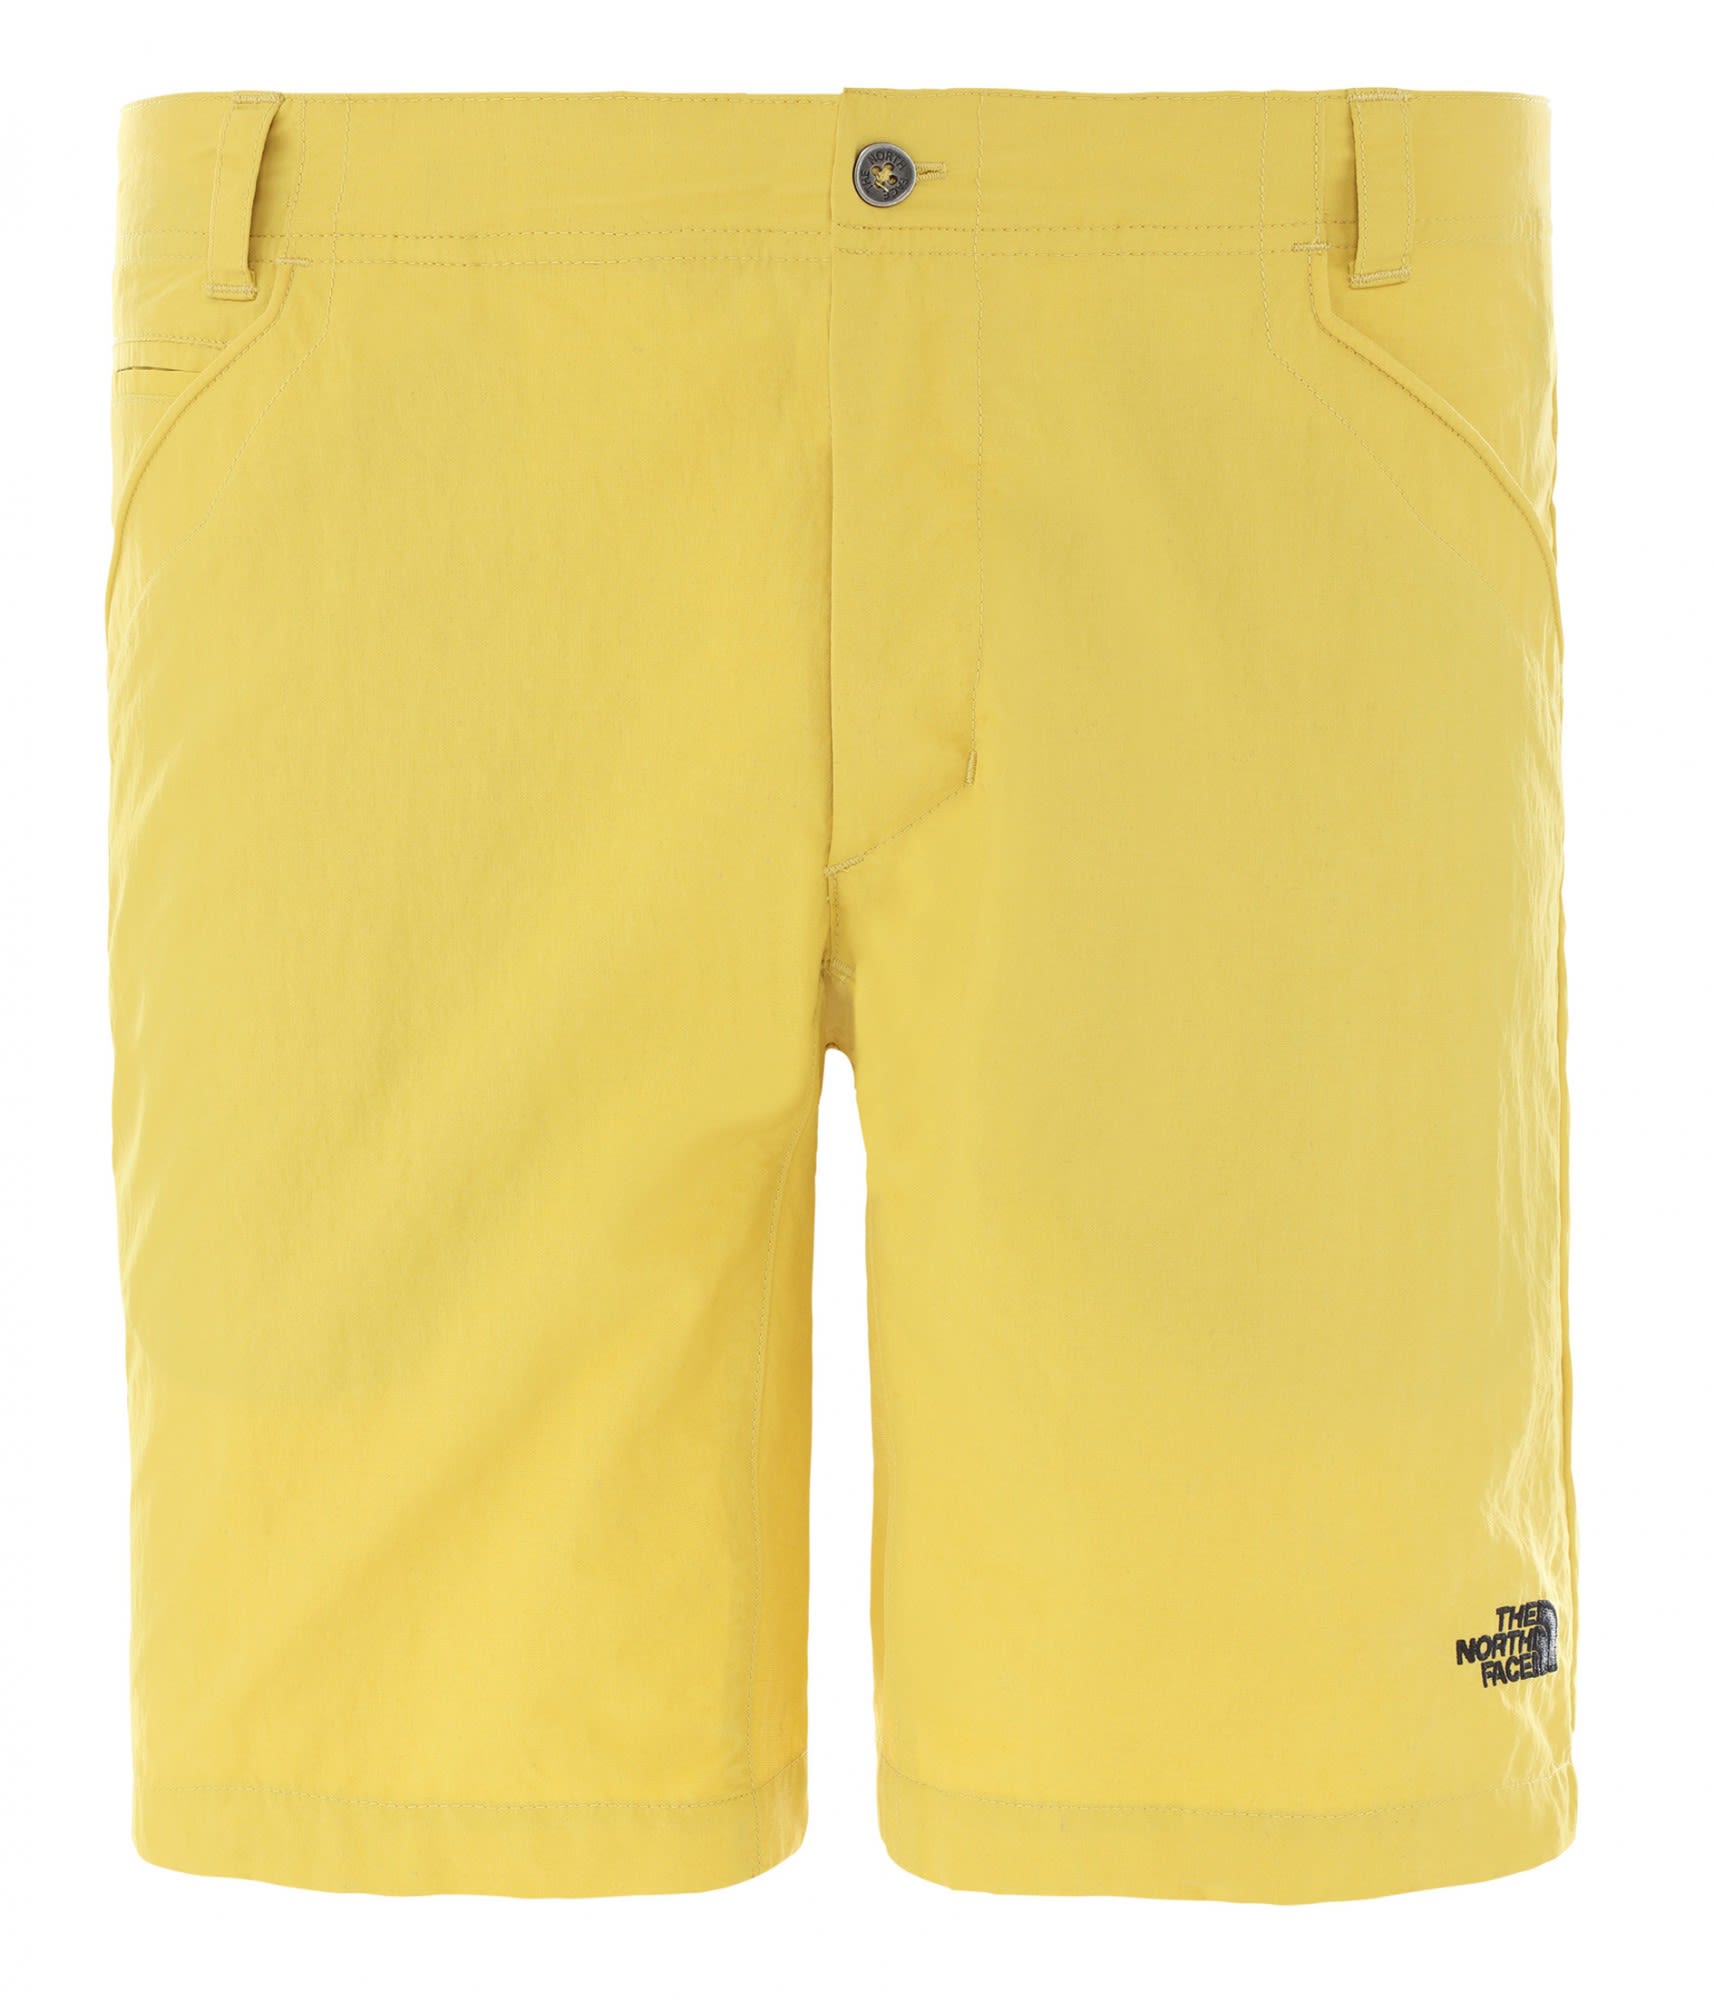 The North Face Bequeme vielseitige Herren Outdoor Shorts Bamboo Yellow